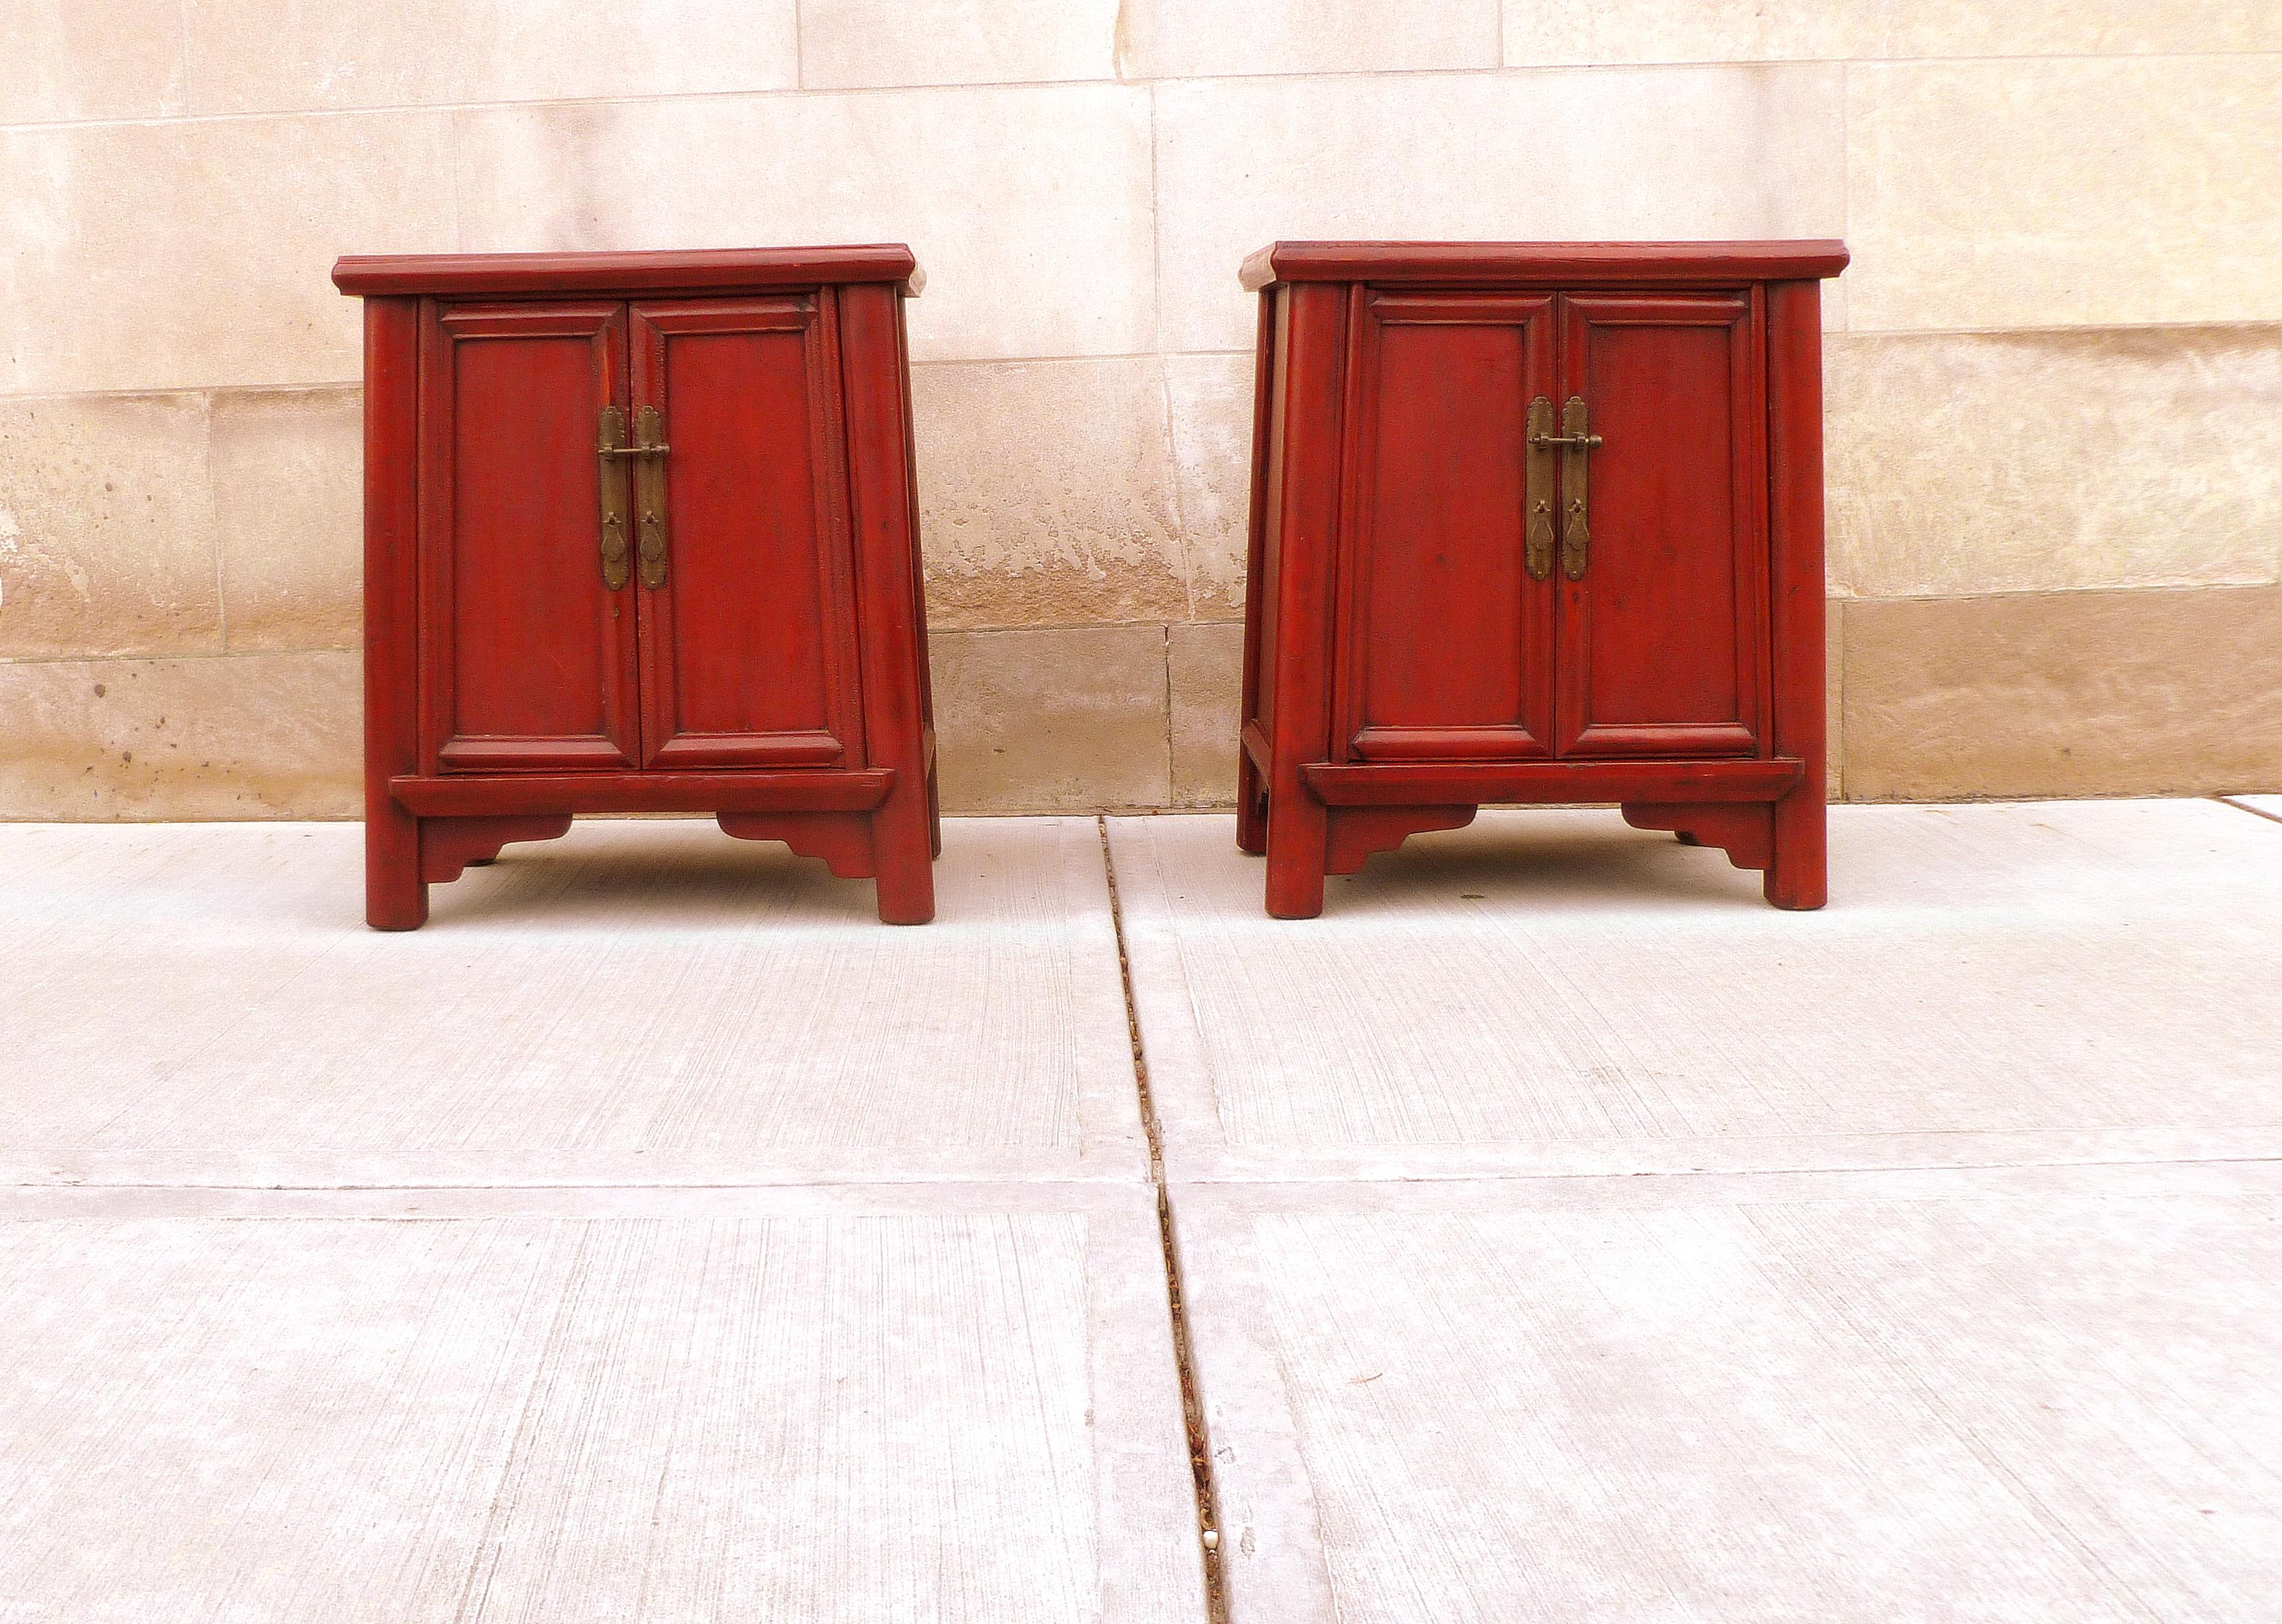 Pair of red lacquer chests with open doors and removable shelf inside on each chest, one drawer inside each chest.